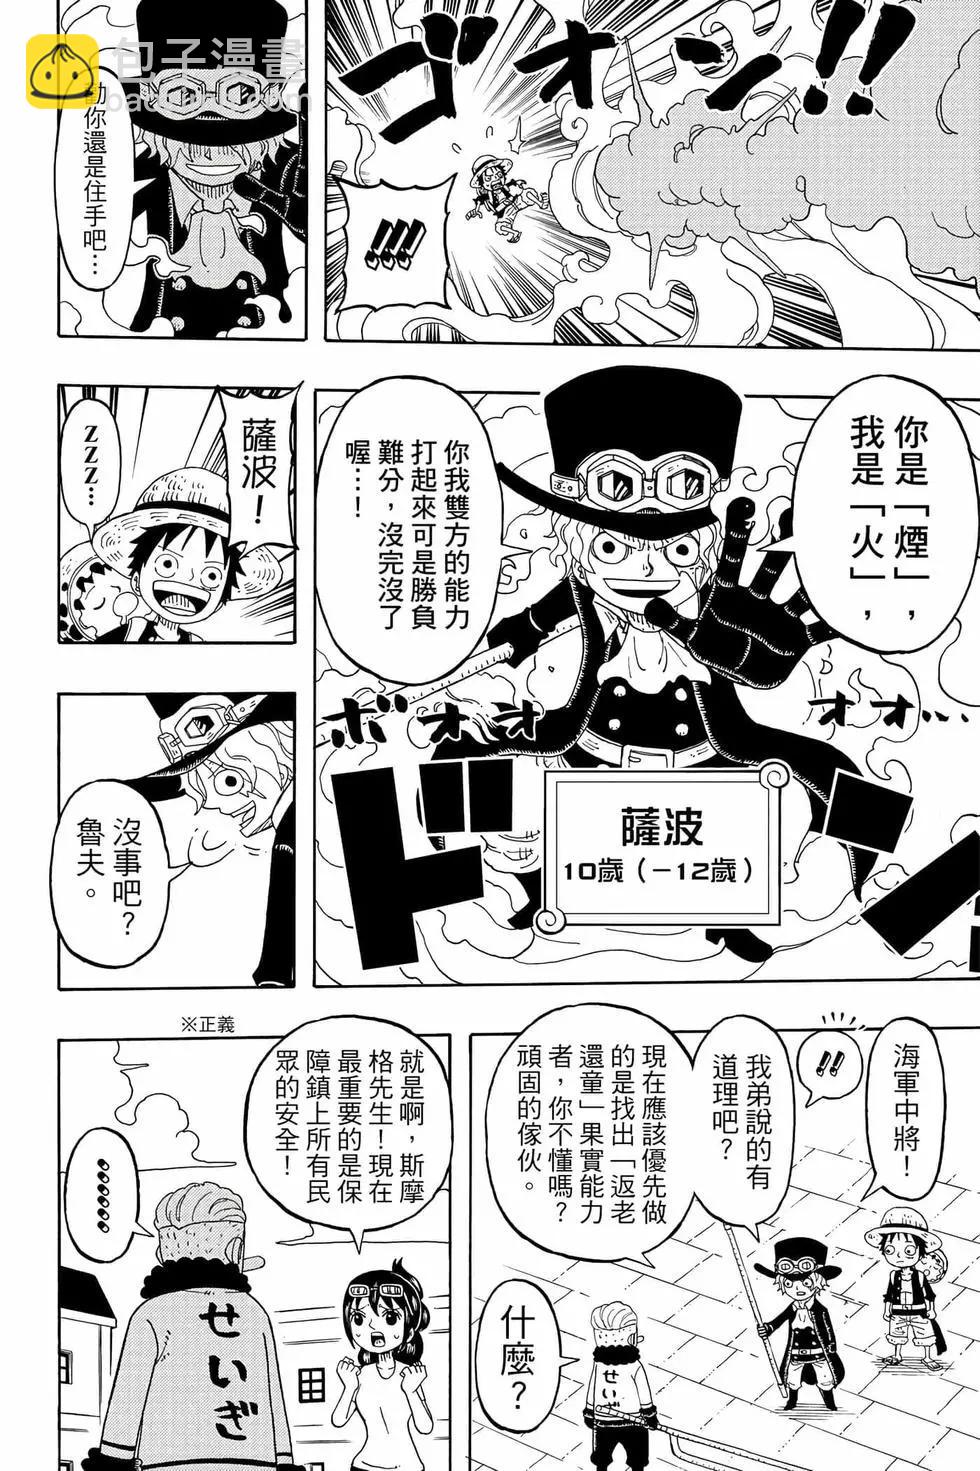 One piece party - 第05卷(1/4) - 1